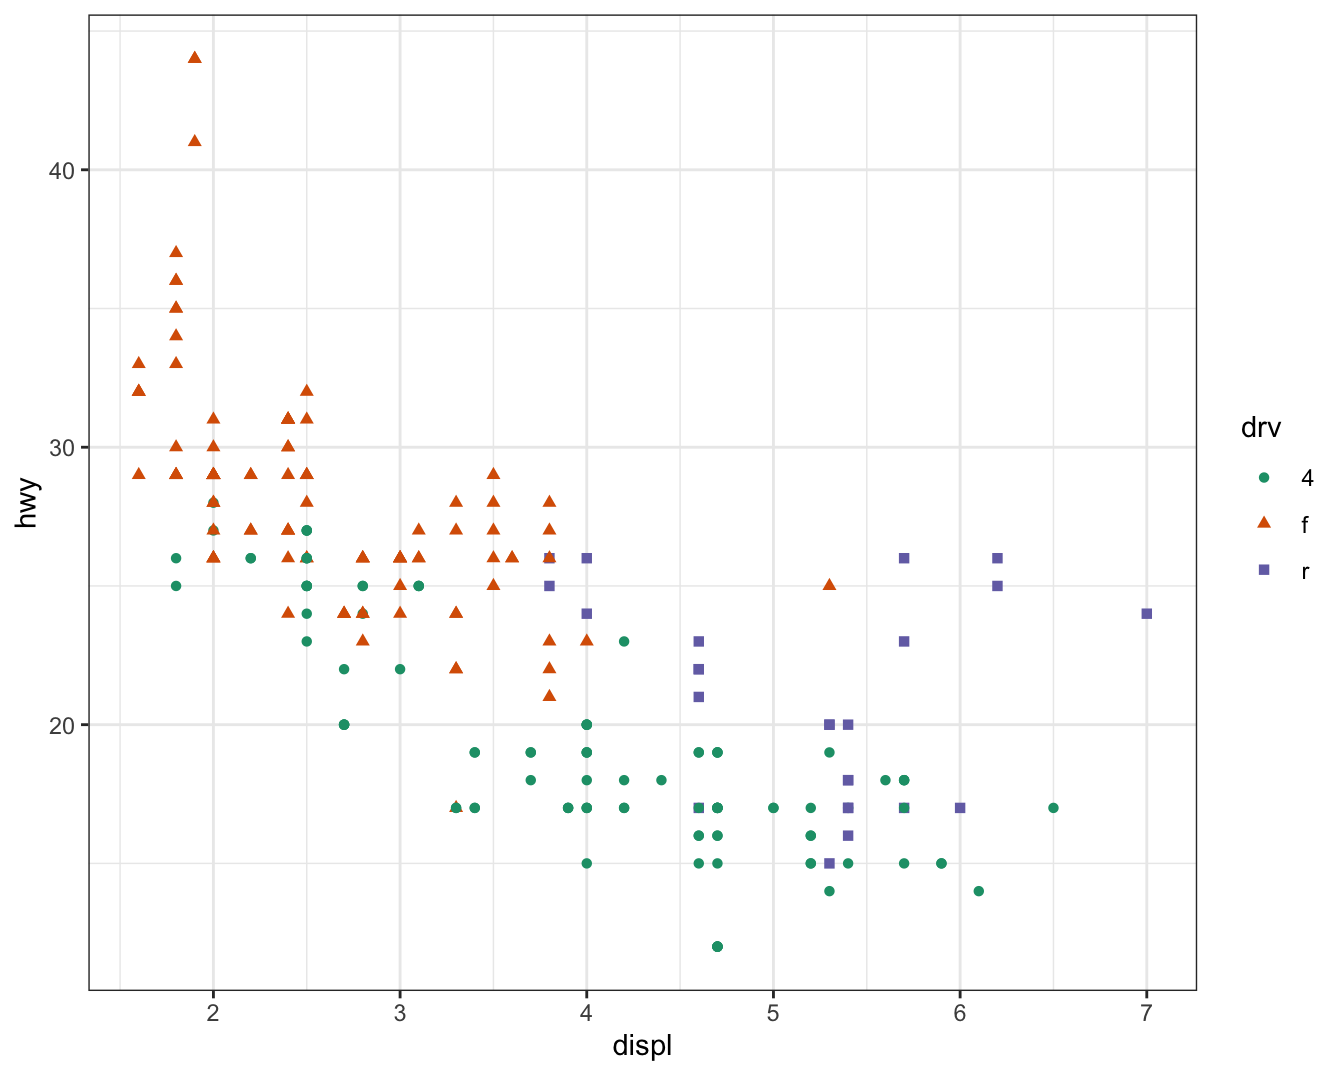 Two scatterplots of highway mileage versus engine size where both color
and shape of points are based on drive type. The color palette is not
the default ggplot2 palette.